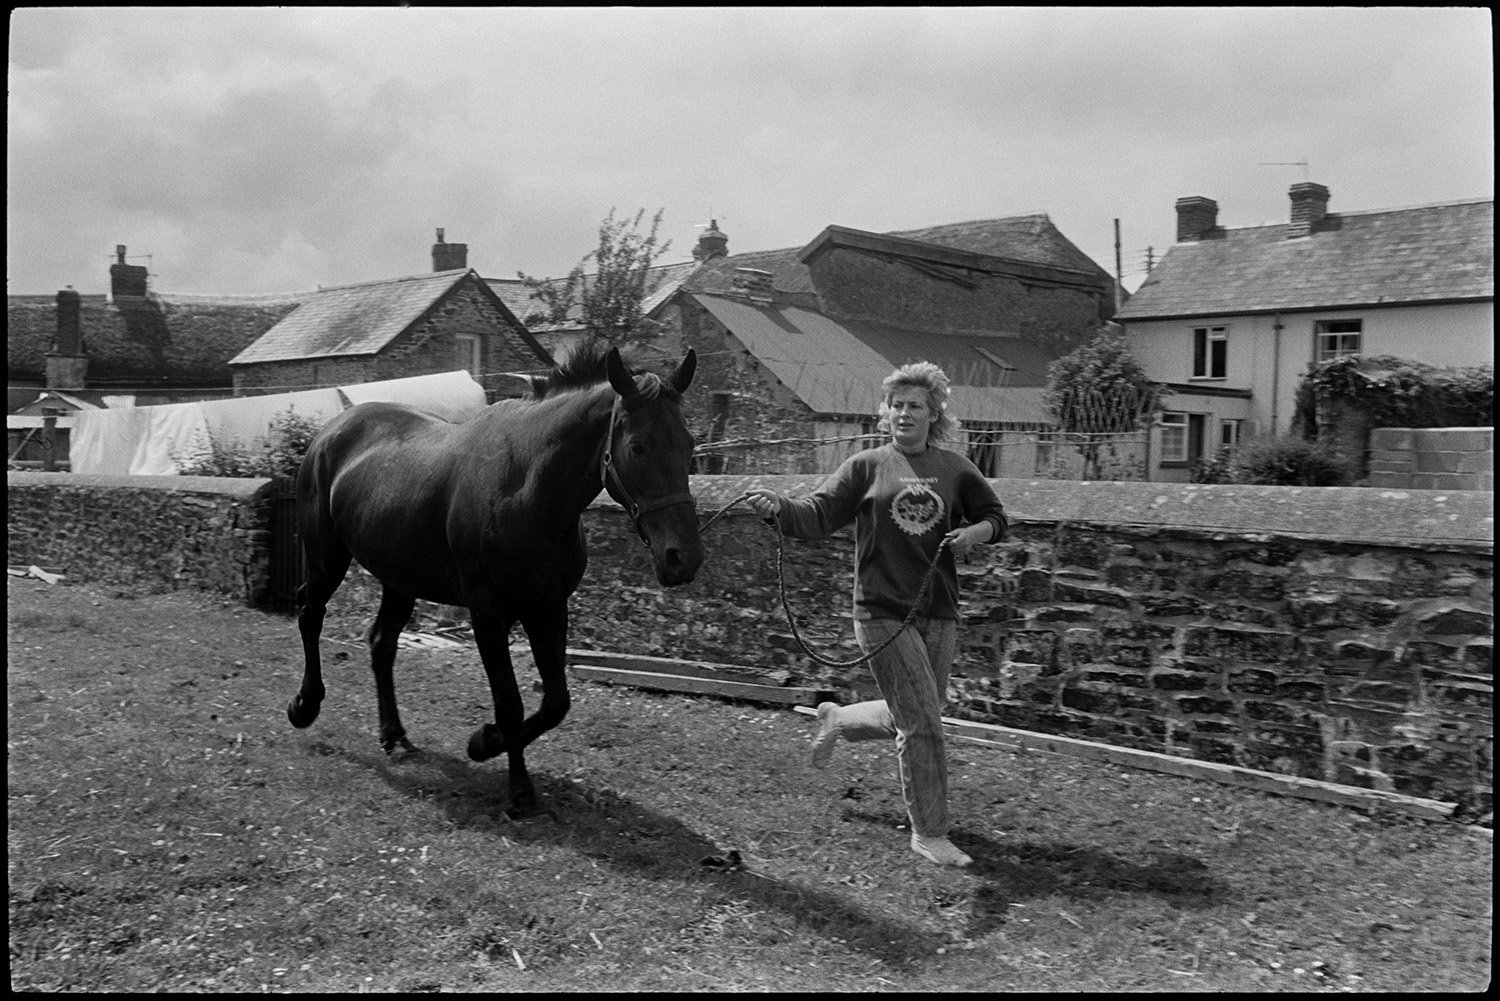 Horse taken out of stables to be shod. 
[Kay Allin bringing a horse into a field for a blacksmith to shoe it at Dolton. Cottages can be seen in the background behind a wall around the field.]